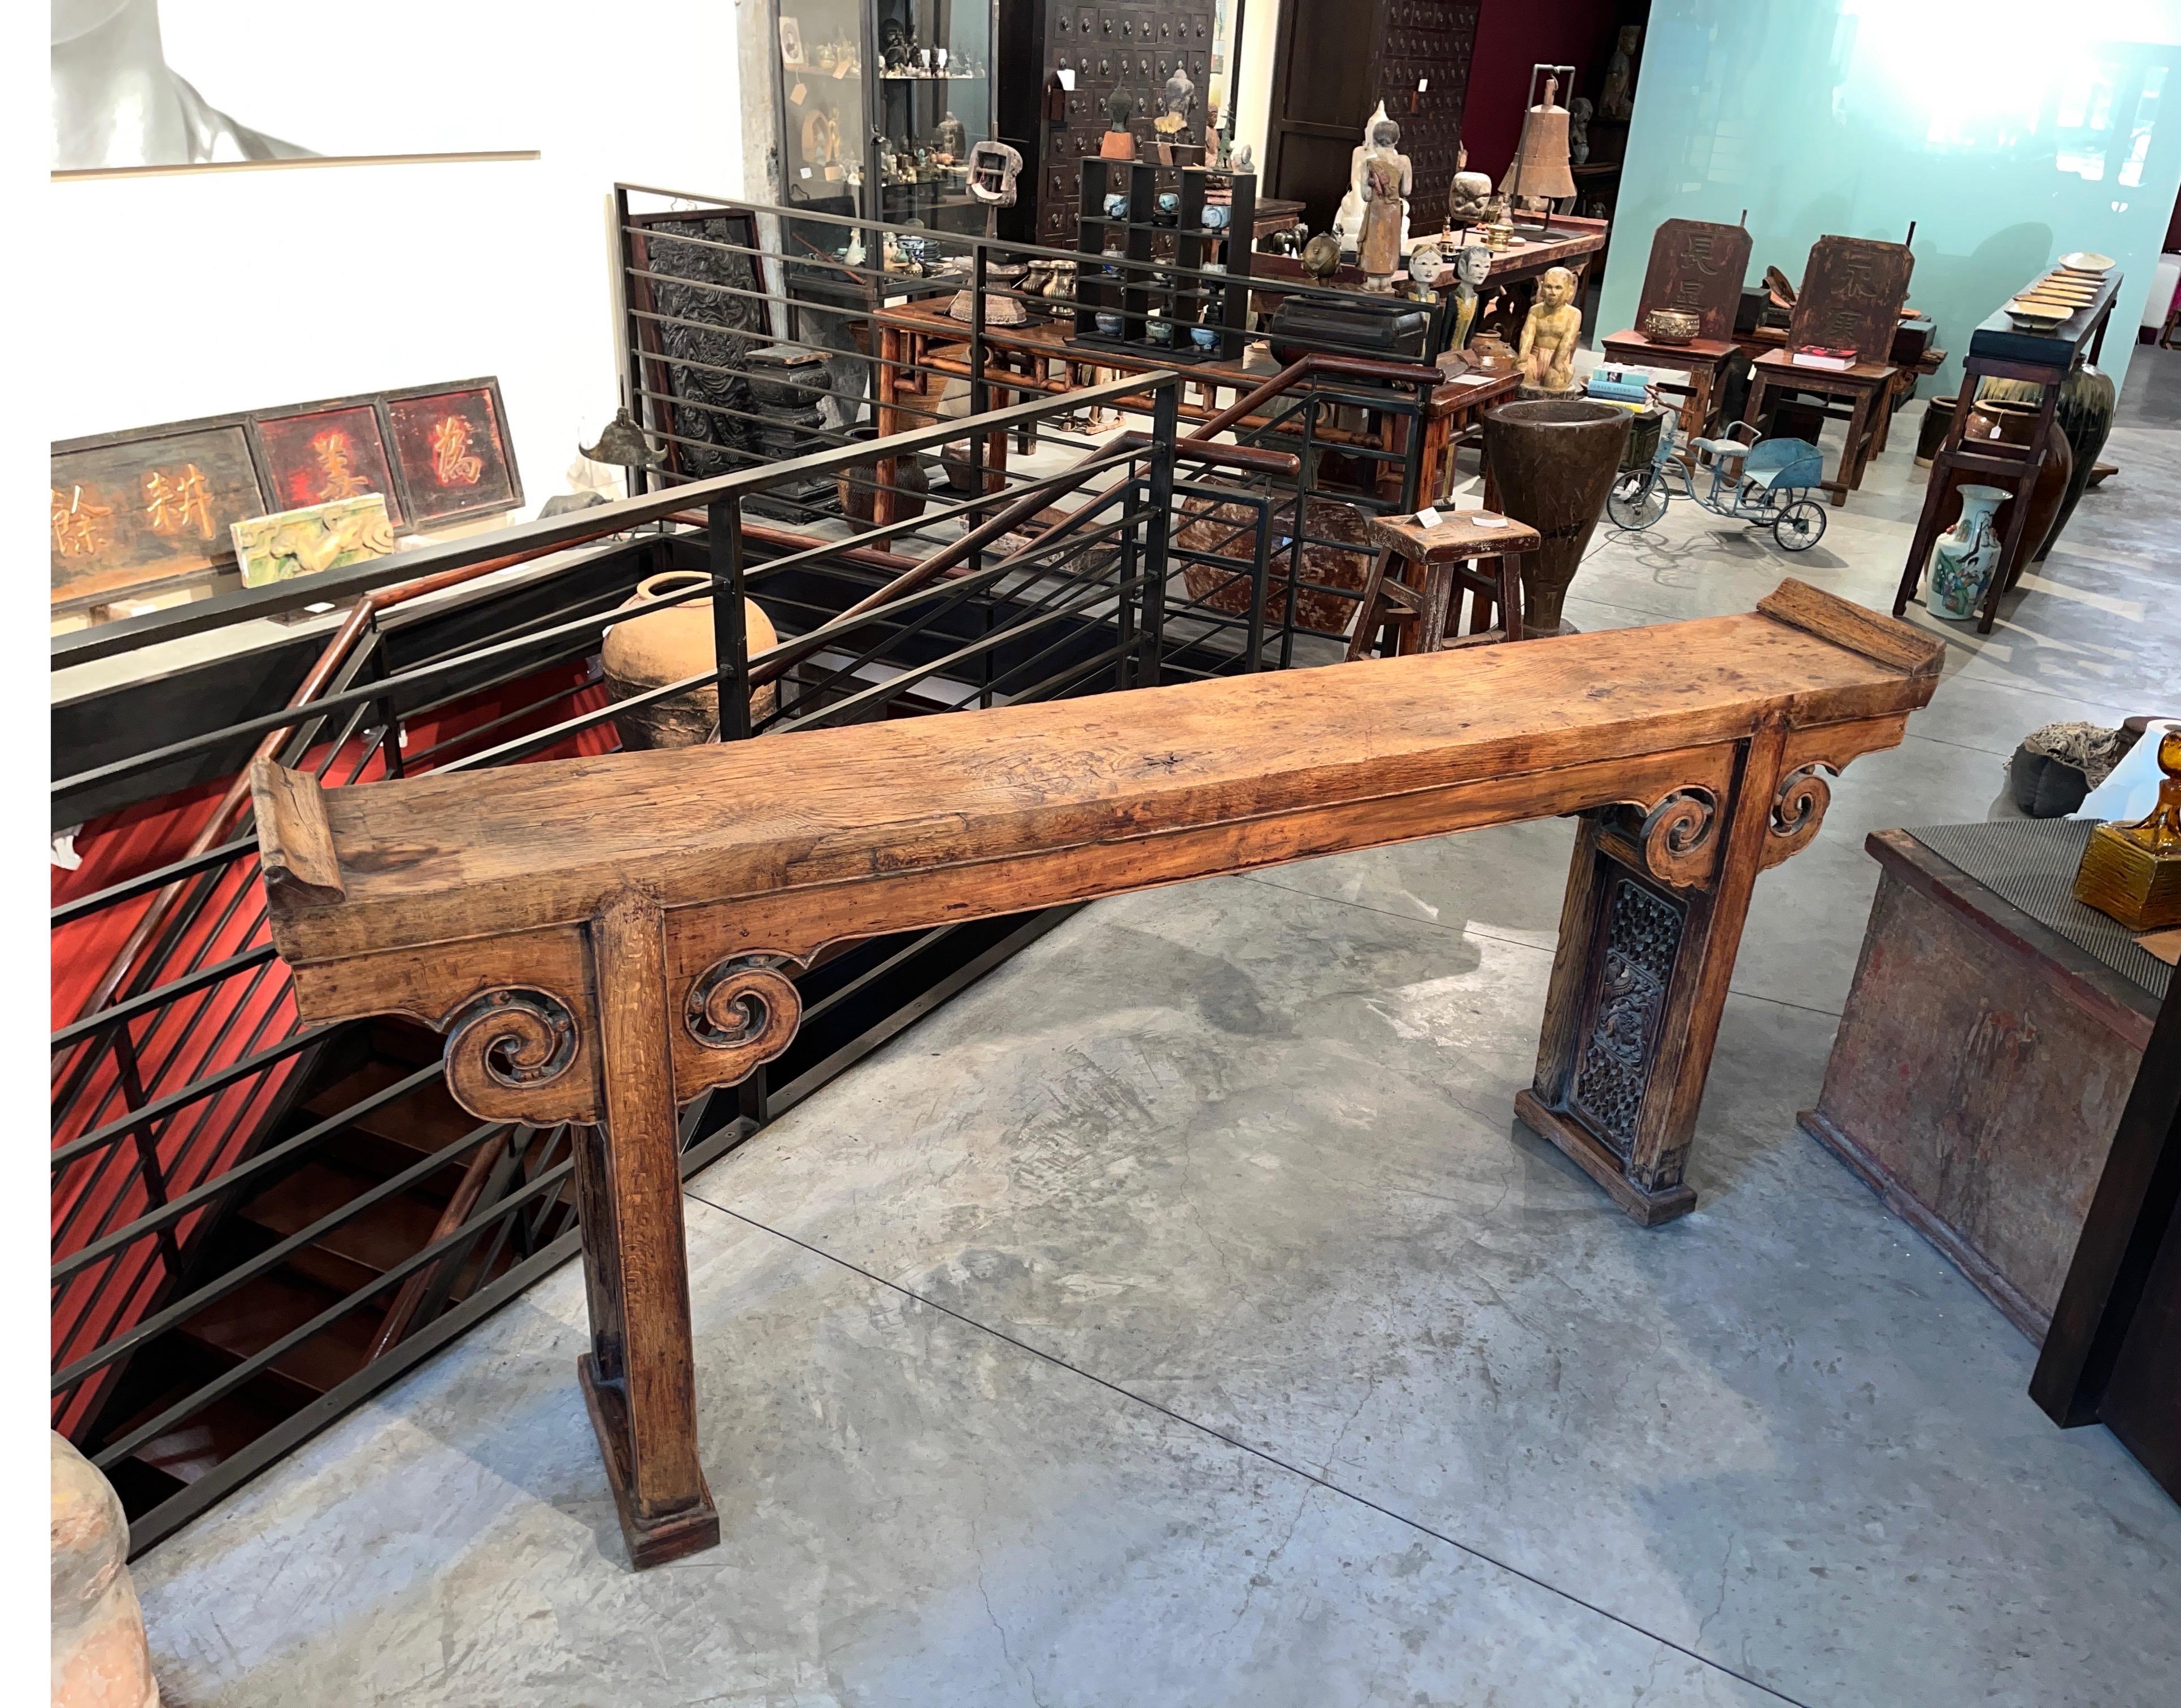 A classic  early 19th Century Chinese altar table with a solid two inch thick oak wood plank top and everted ends,  displaying a gorgeous patina.  An altar table of this scale would have been found in an important temple, presenting  an image of